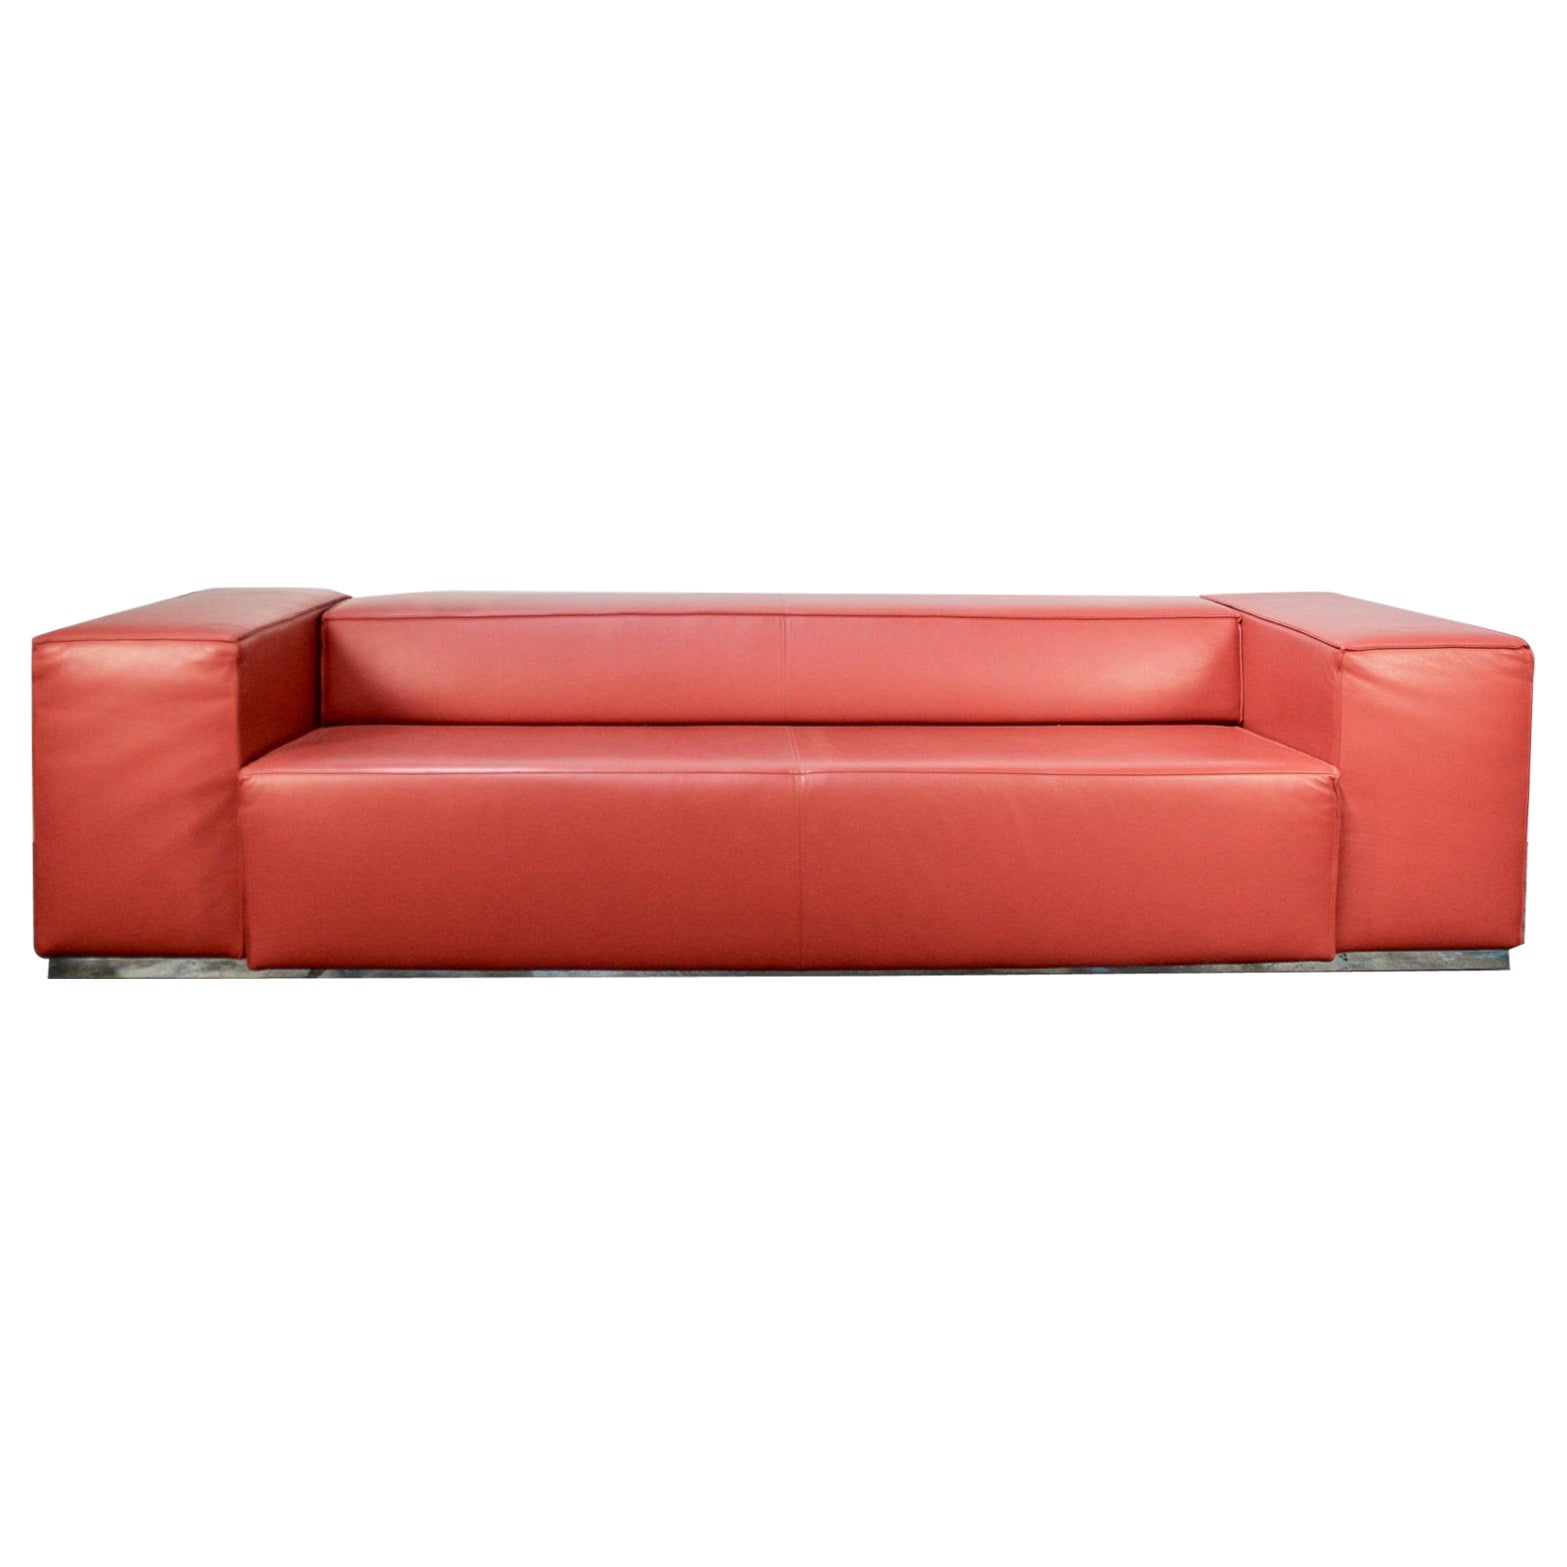 Cassina “Big Blox” 3-Seat Sofa Bed in Deep Red Leather